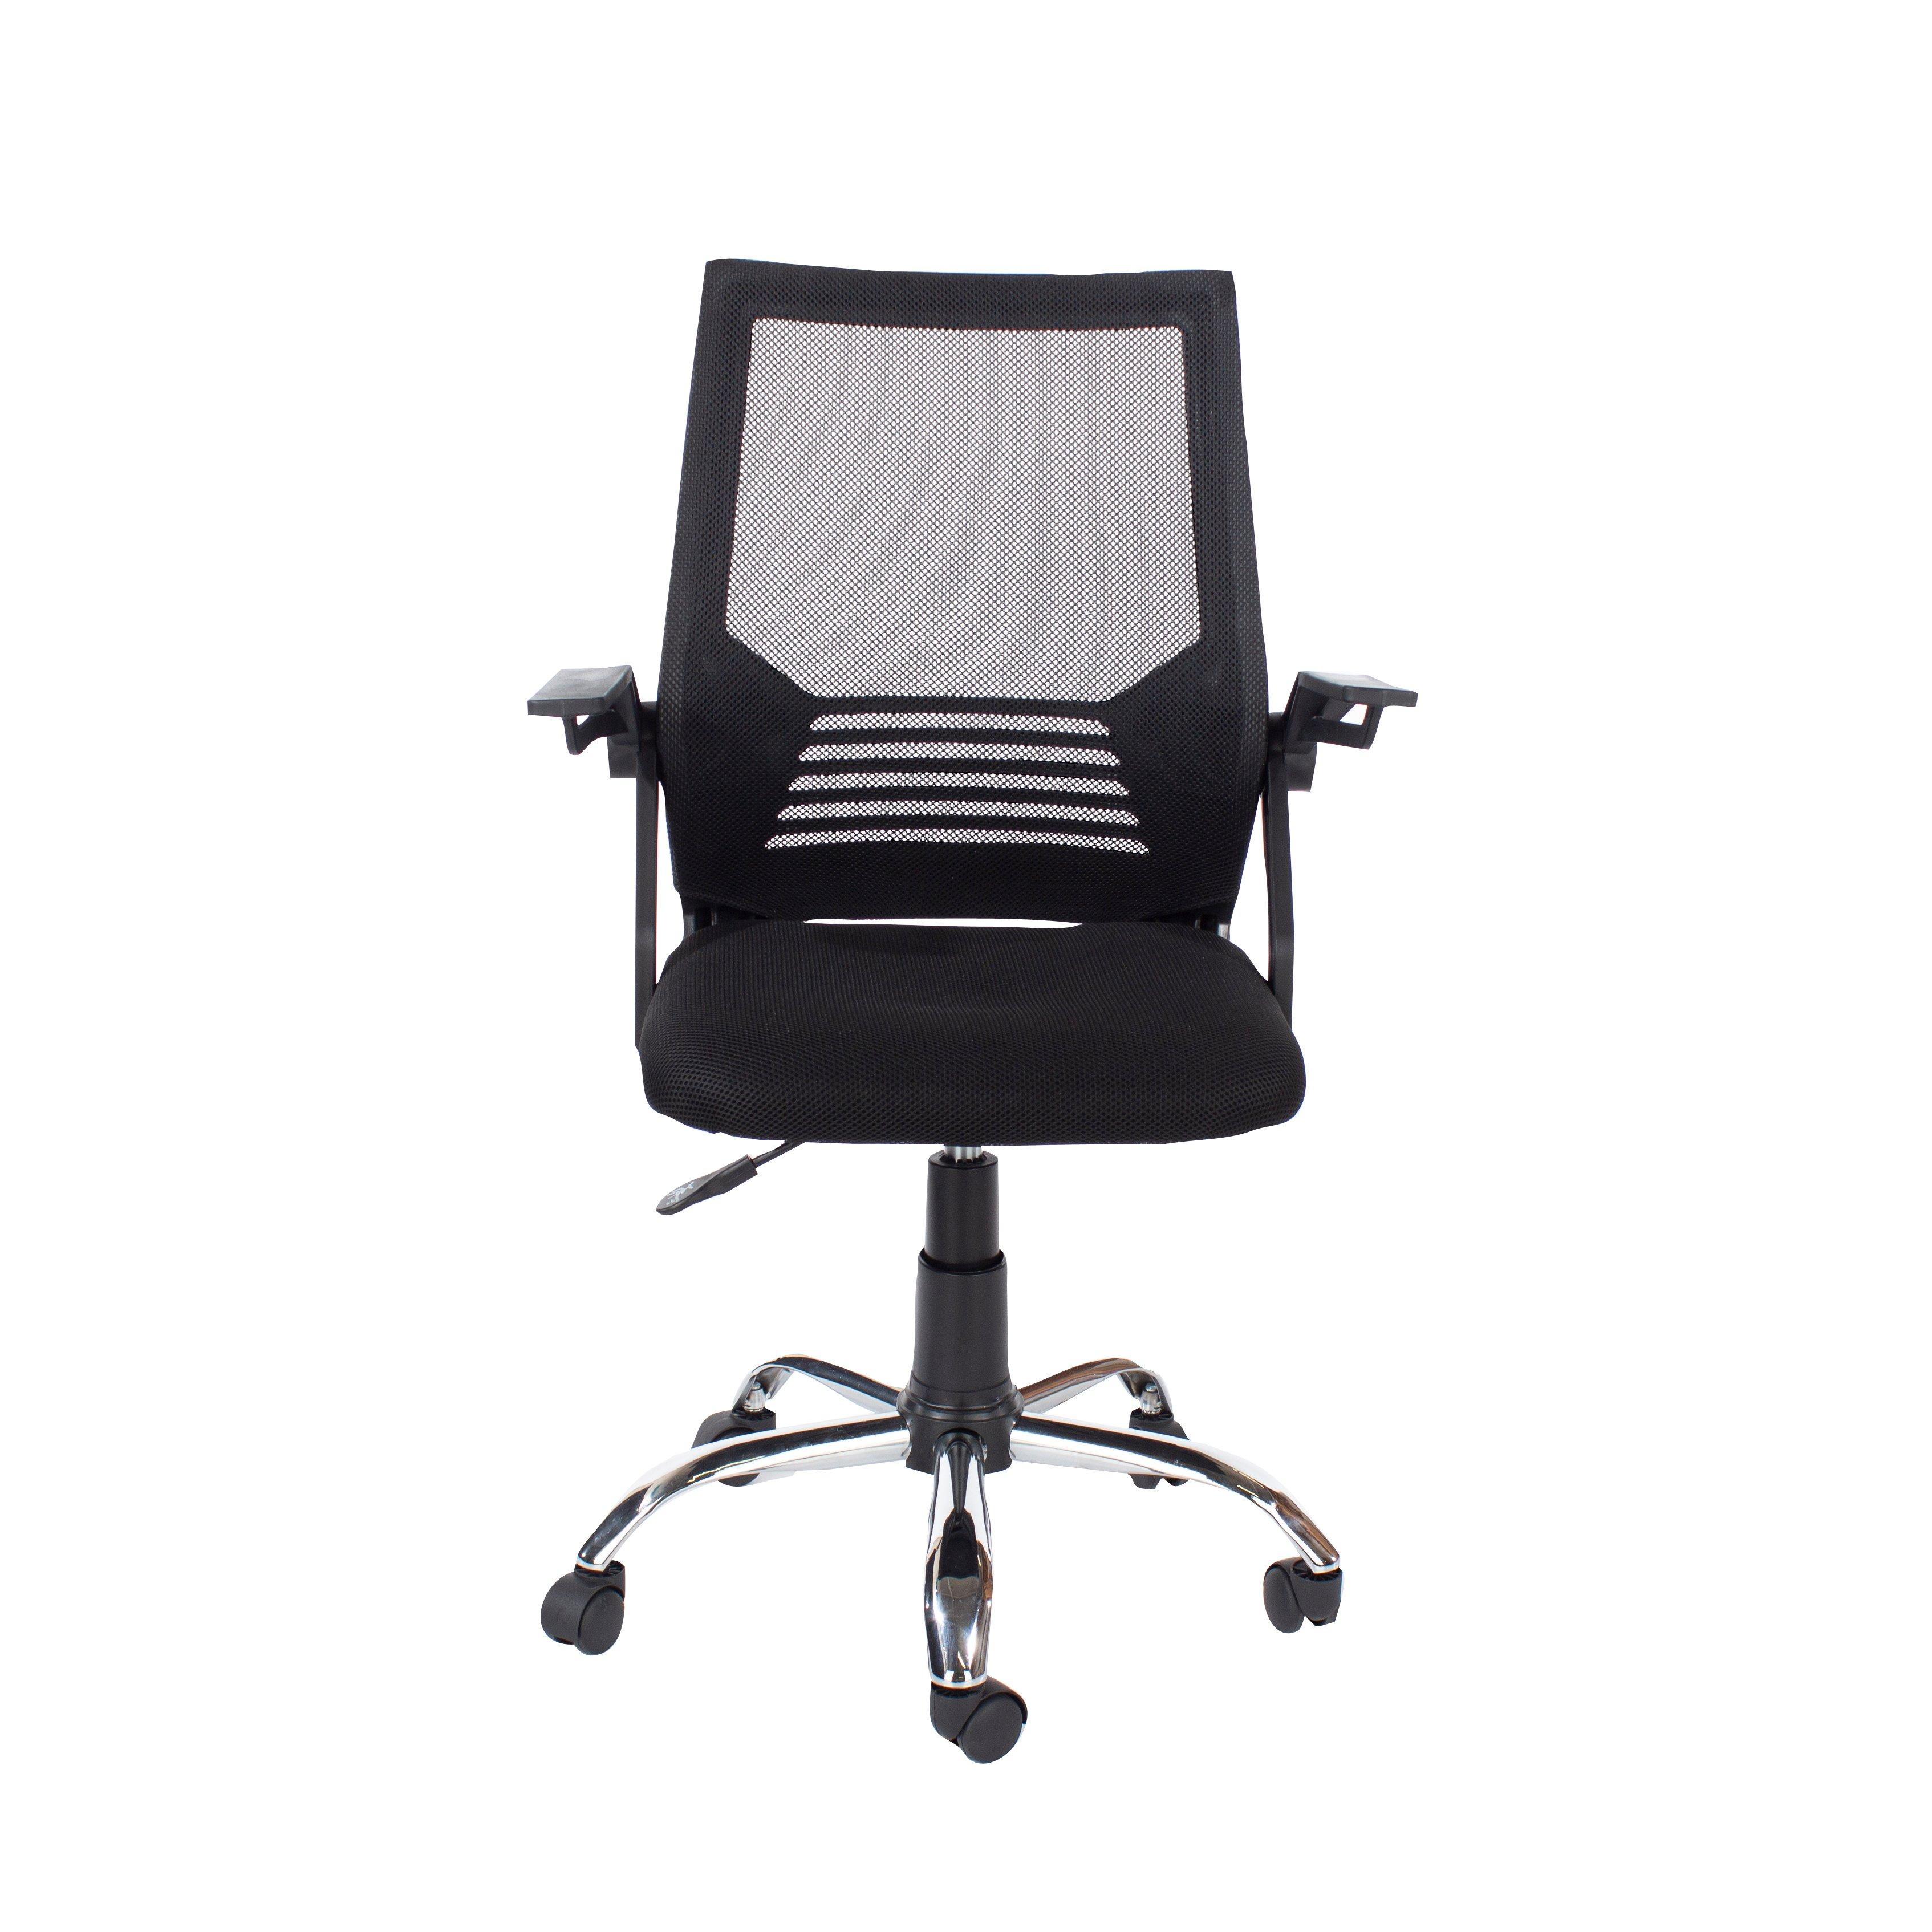 Loft Home Office Study Chair With Lift Up Arms, Black Mesh Back, Black Fabric Seat With Chrome Base 